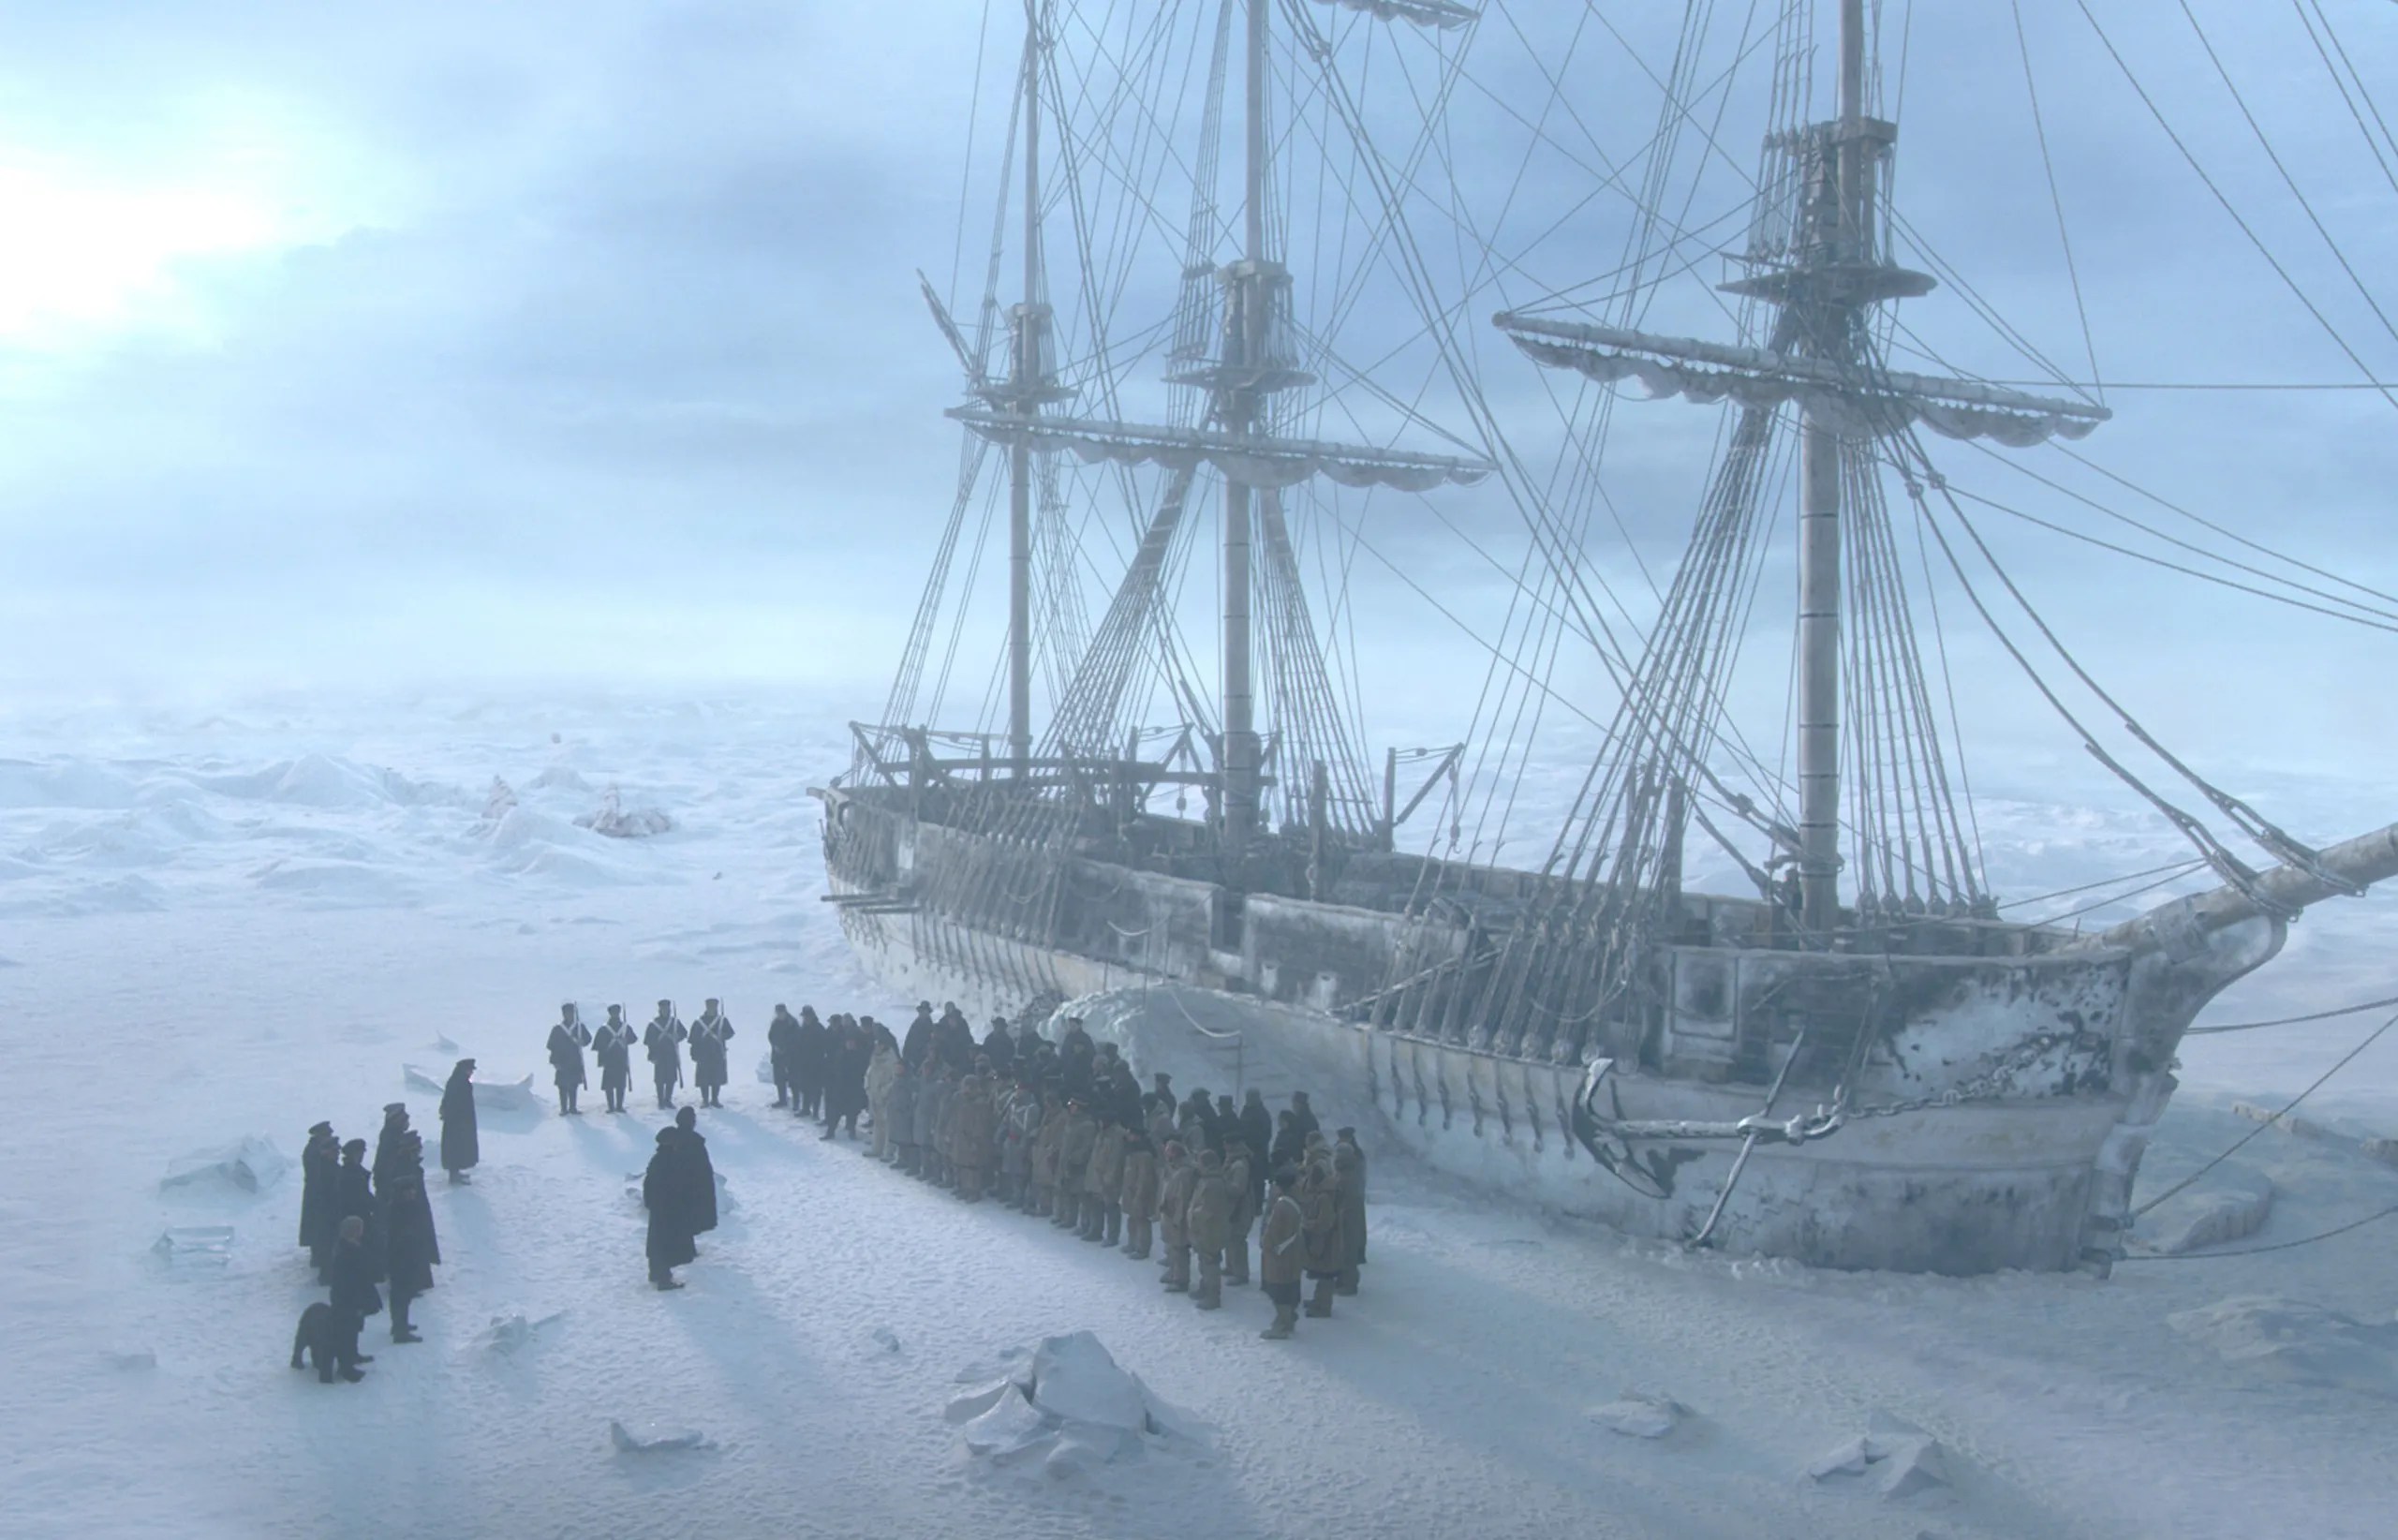 A Royal Navy crew assembles on the Arctic ice beside their ice-lodged explorer ship in 'The Terror.'